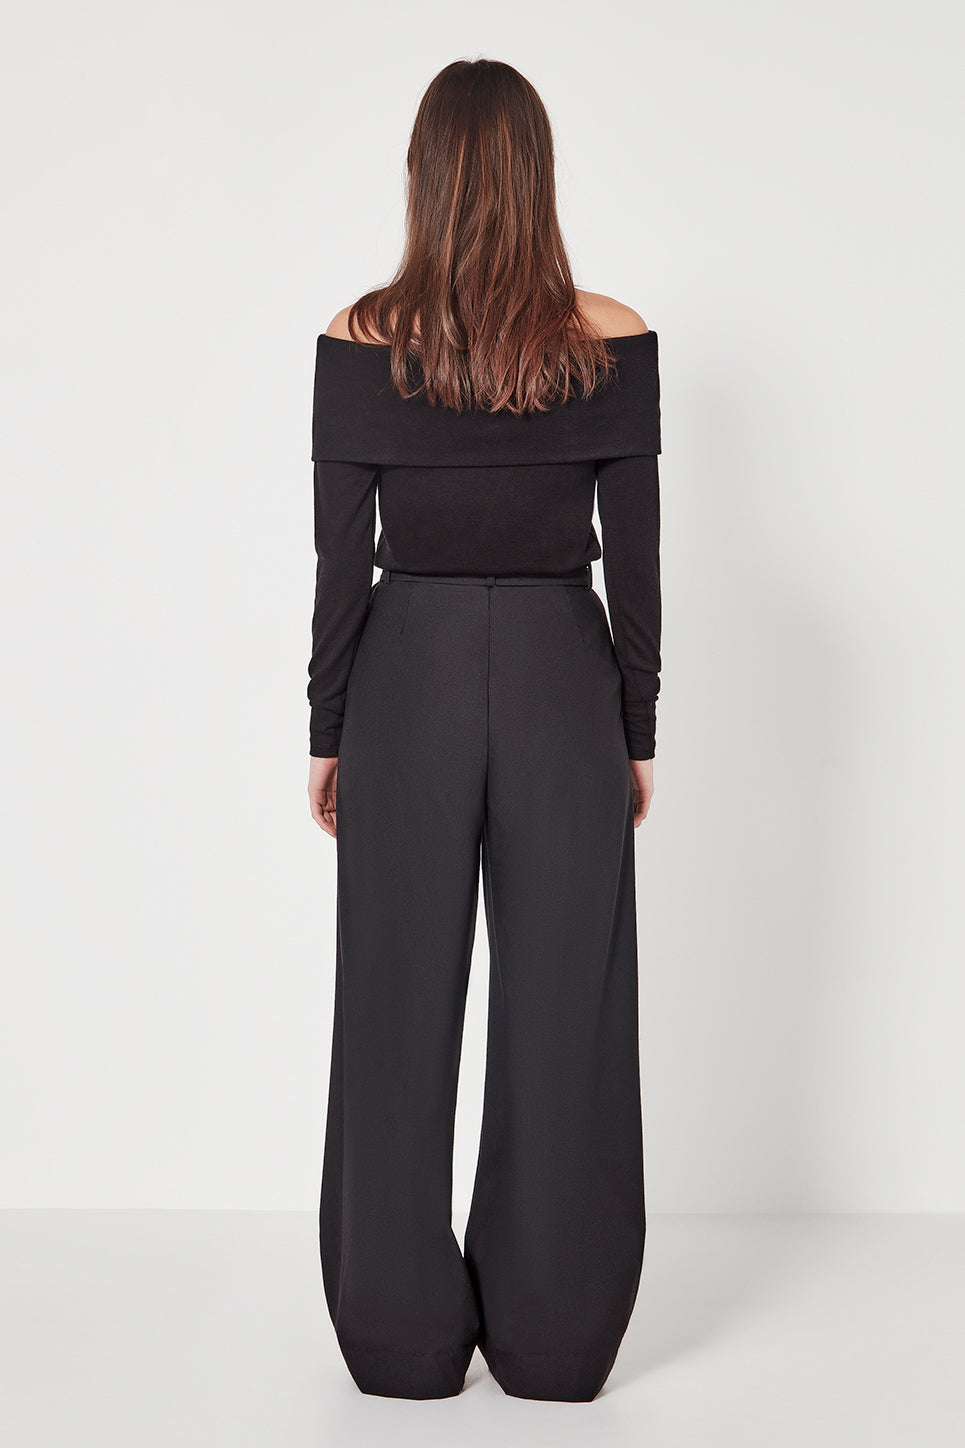 The Asher Trouser in Black